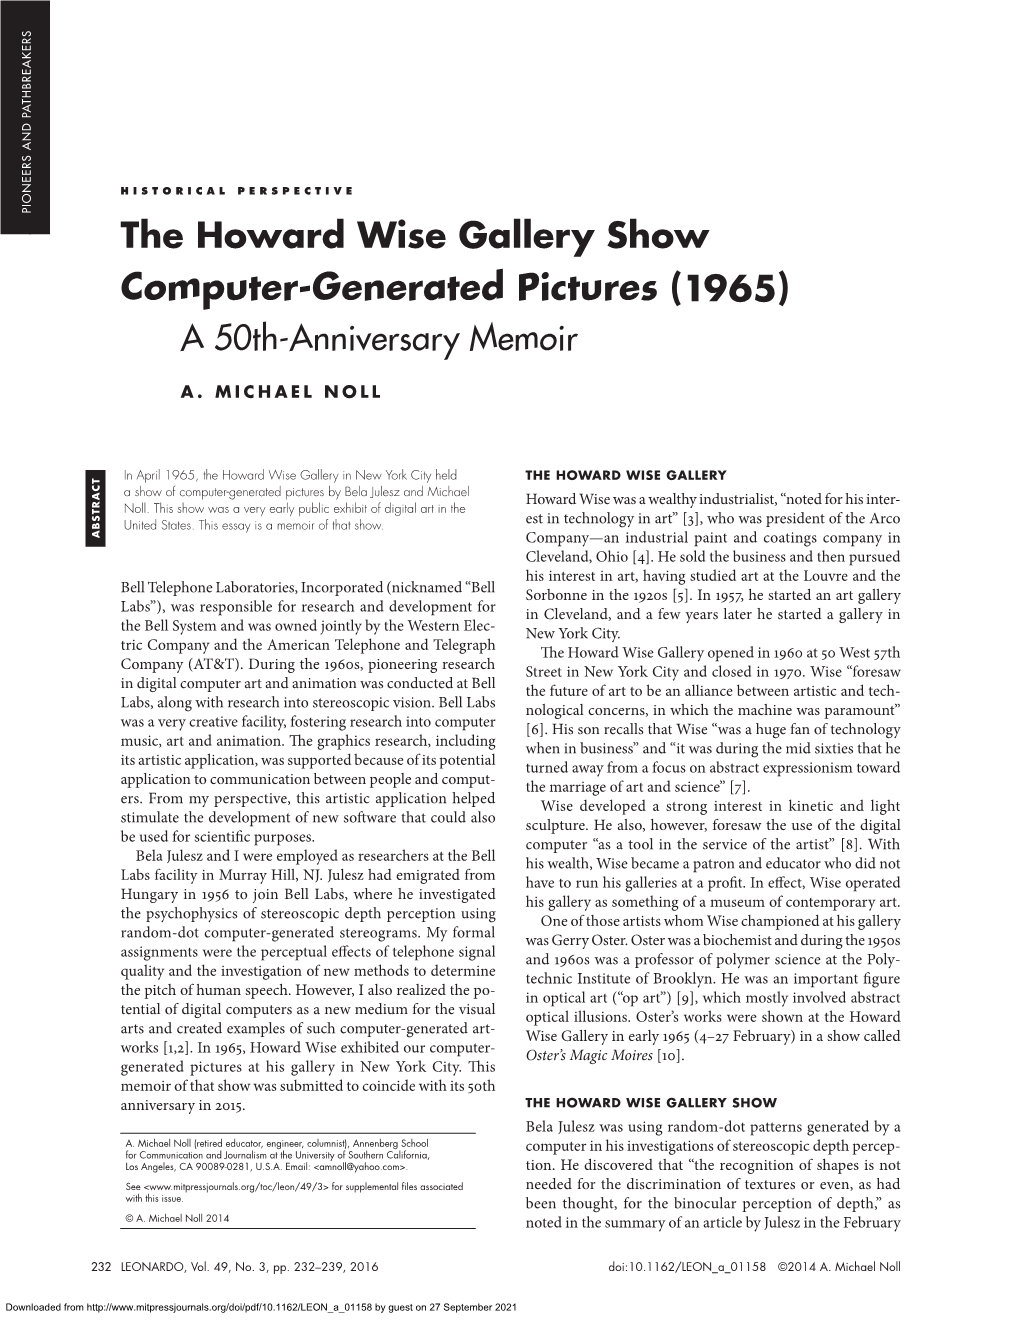 The Howard Wise Gallery Show Computer-Generated Pictures (1965) a 50Th-Anniversary Memoir